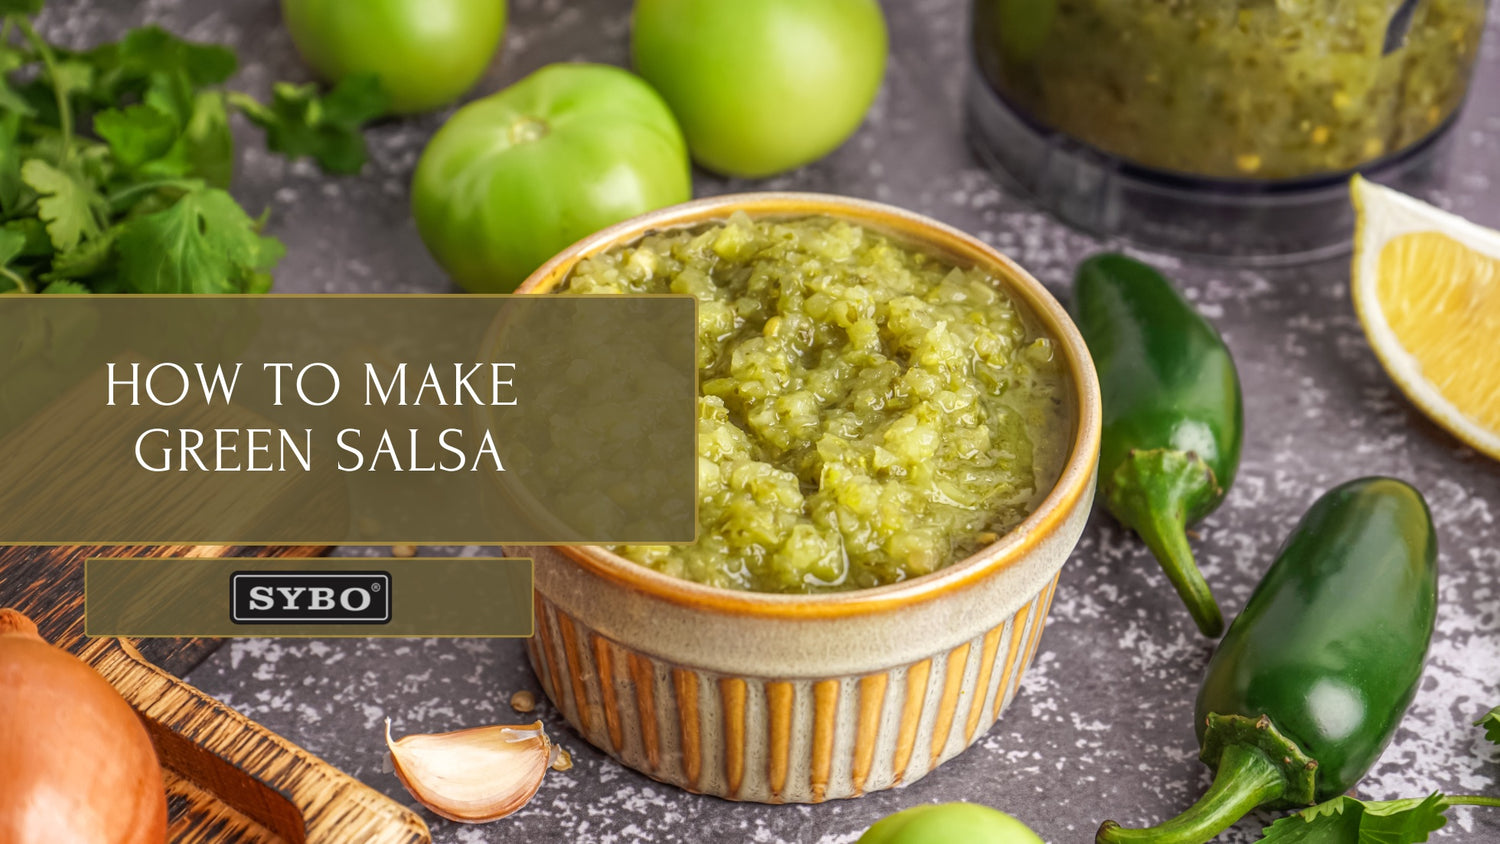 Enhance Your Taco Experience with Homemade Green Salsa